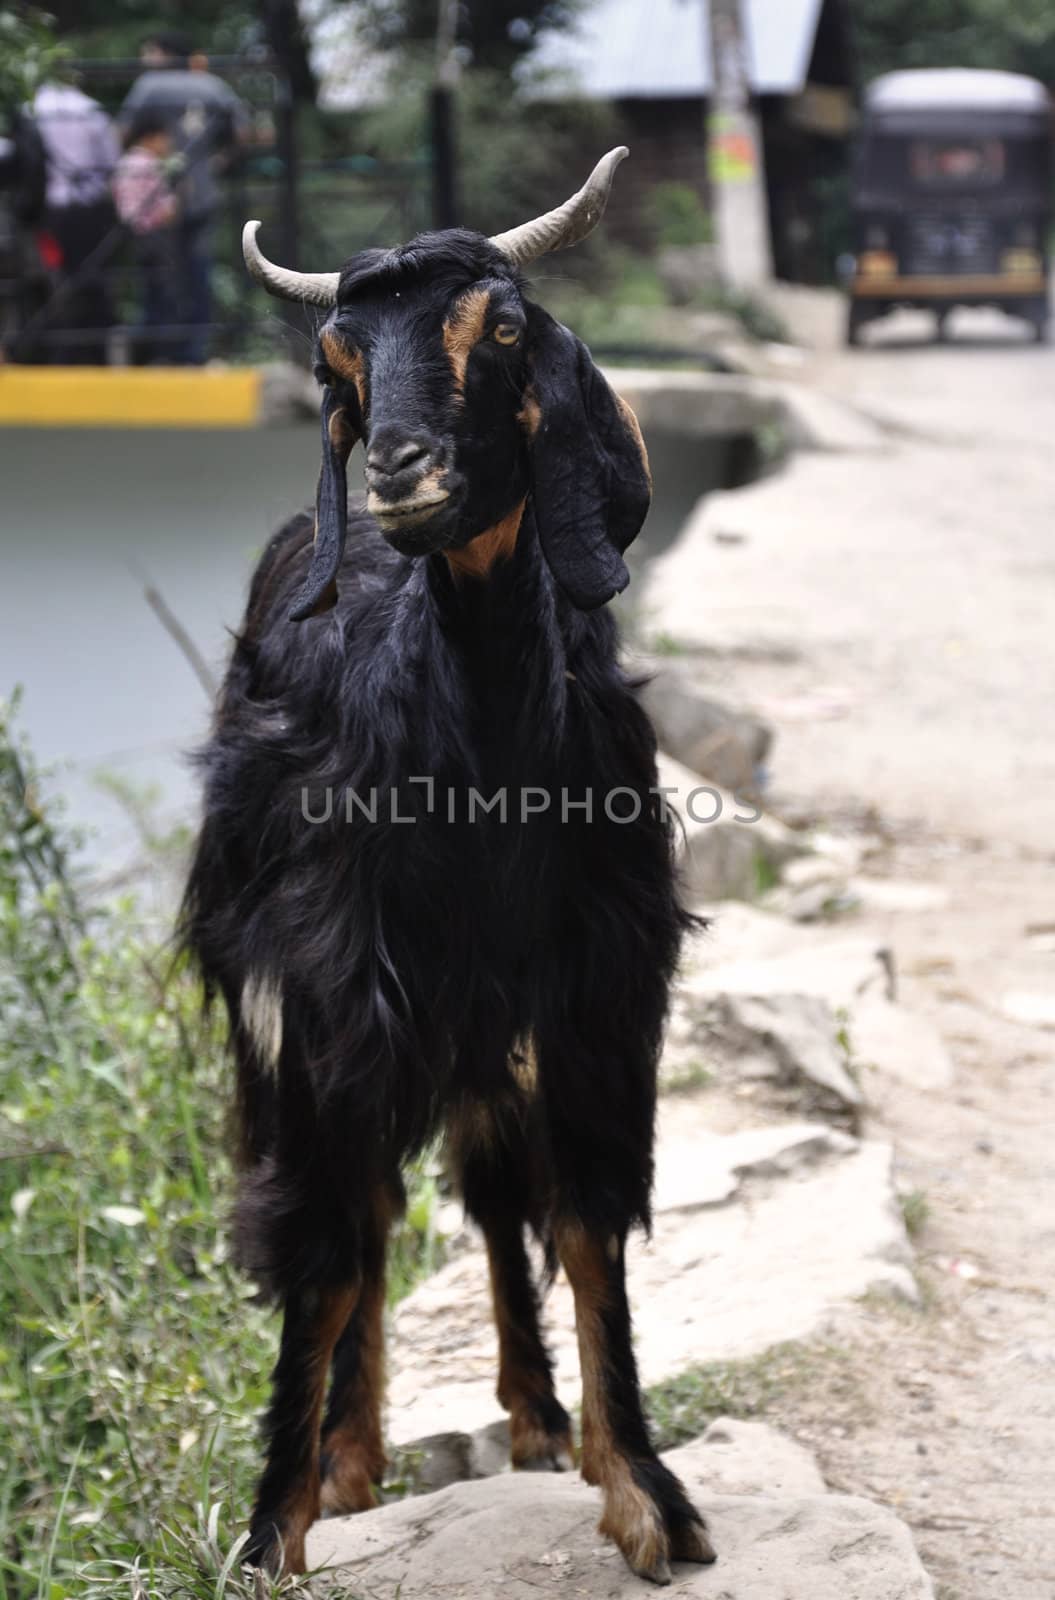 A Goat on the Roads of India